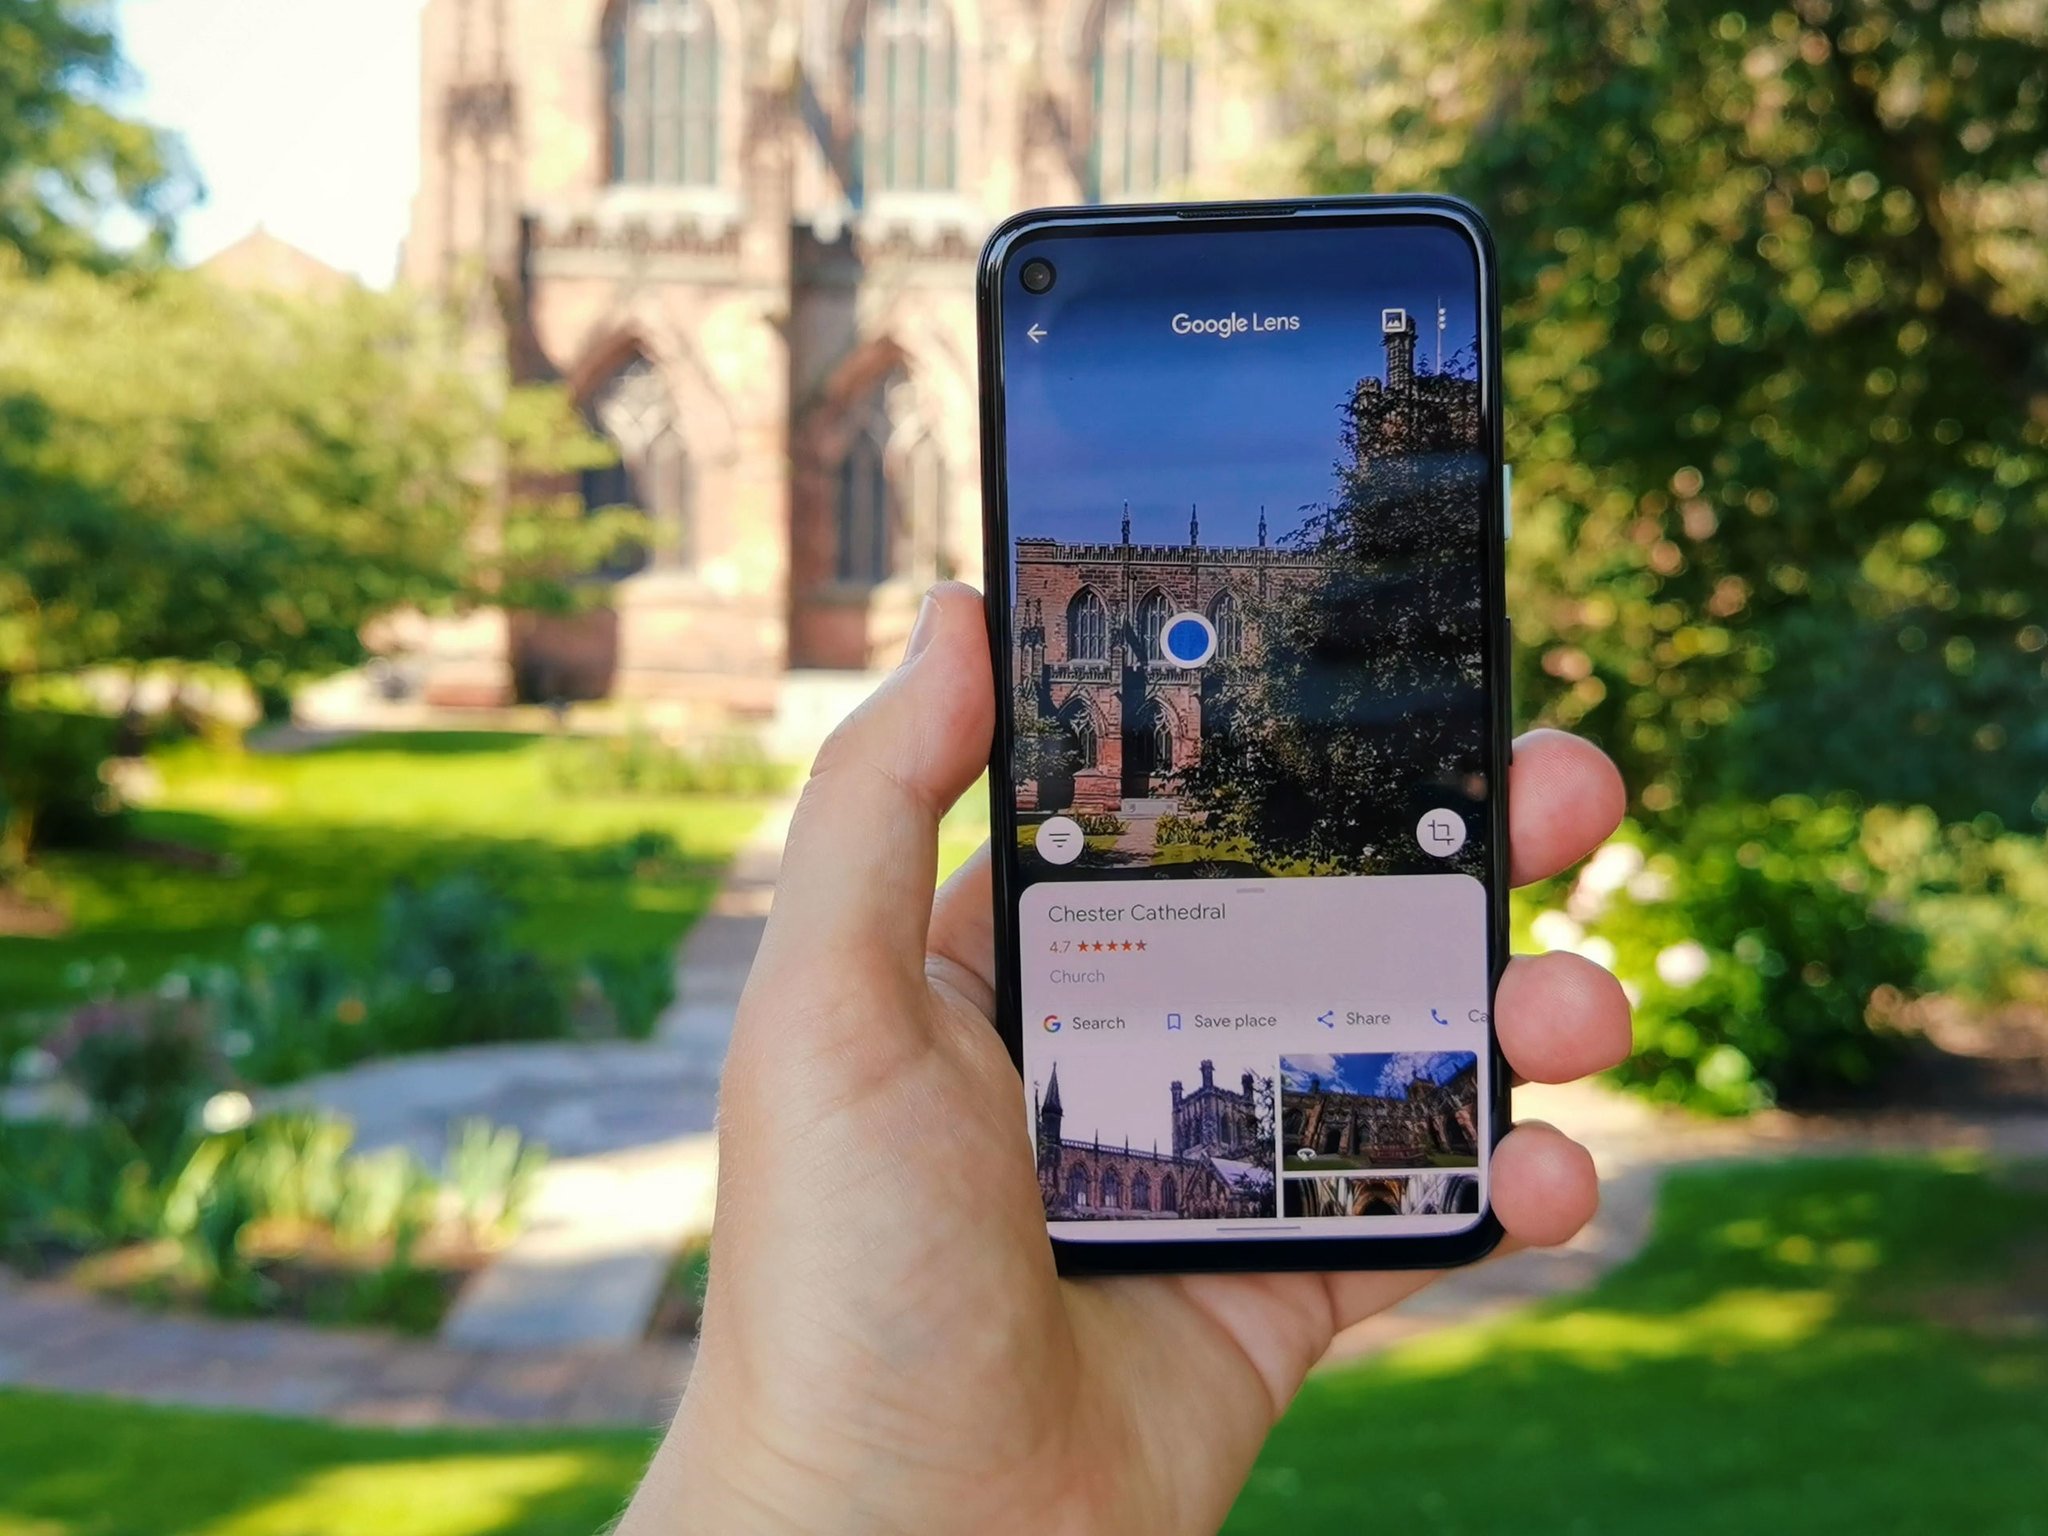 How do I use Google Lens to search an image?